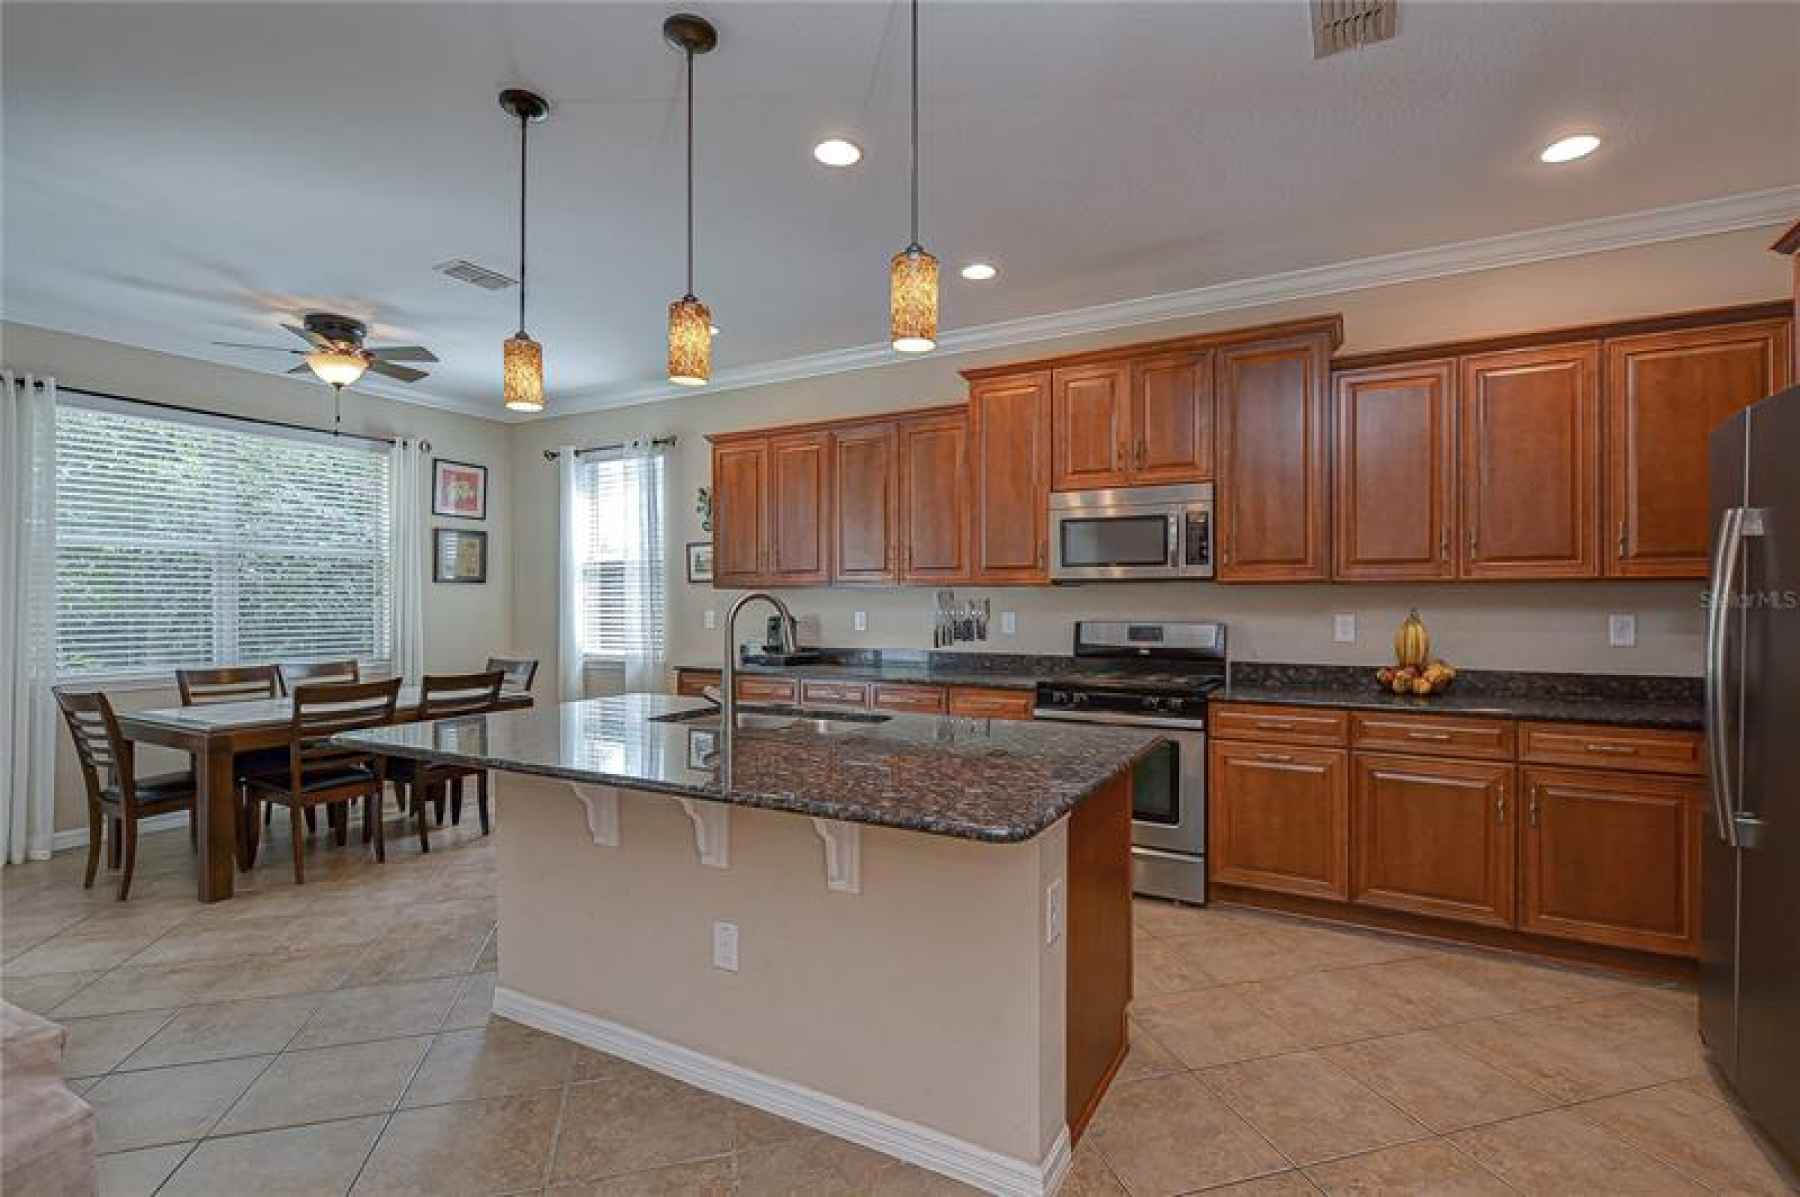 DREAMY kitchen offers so much storage space in the rich cherry cabinets topped with crown!